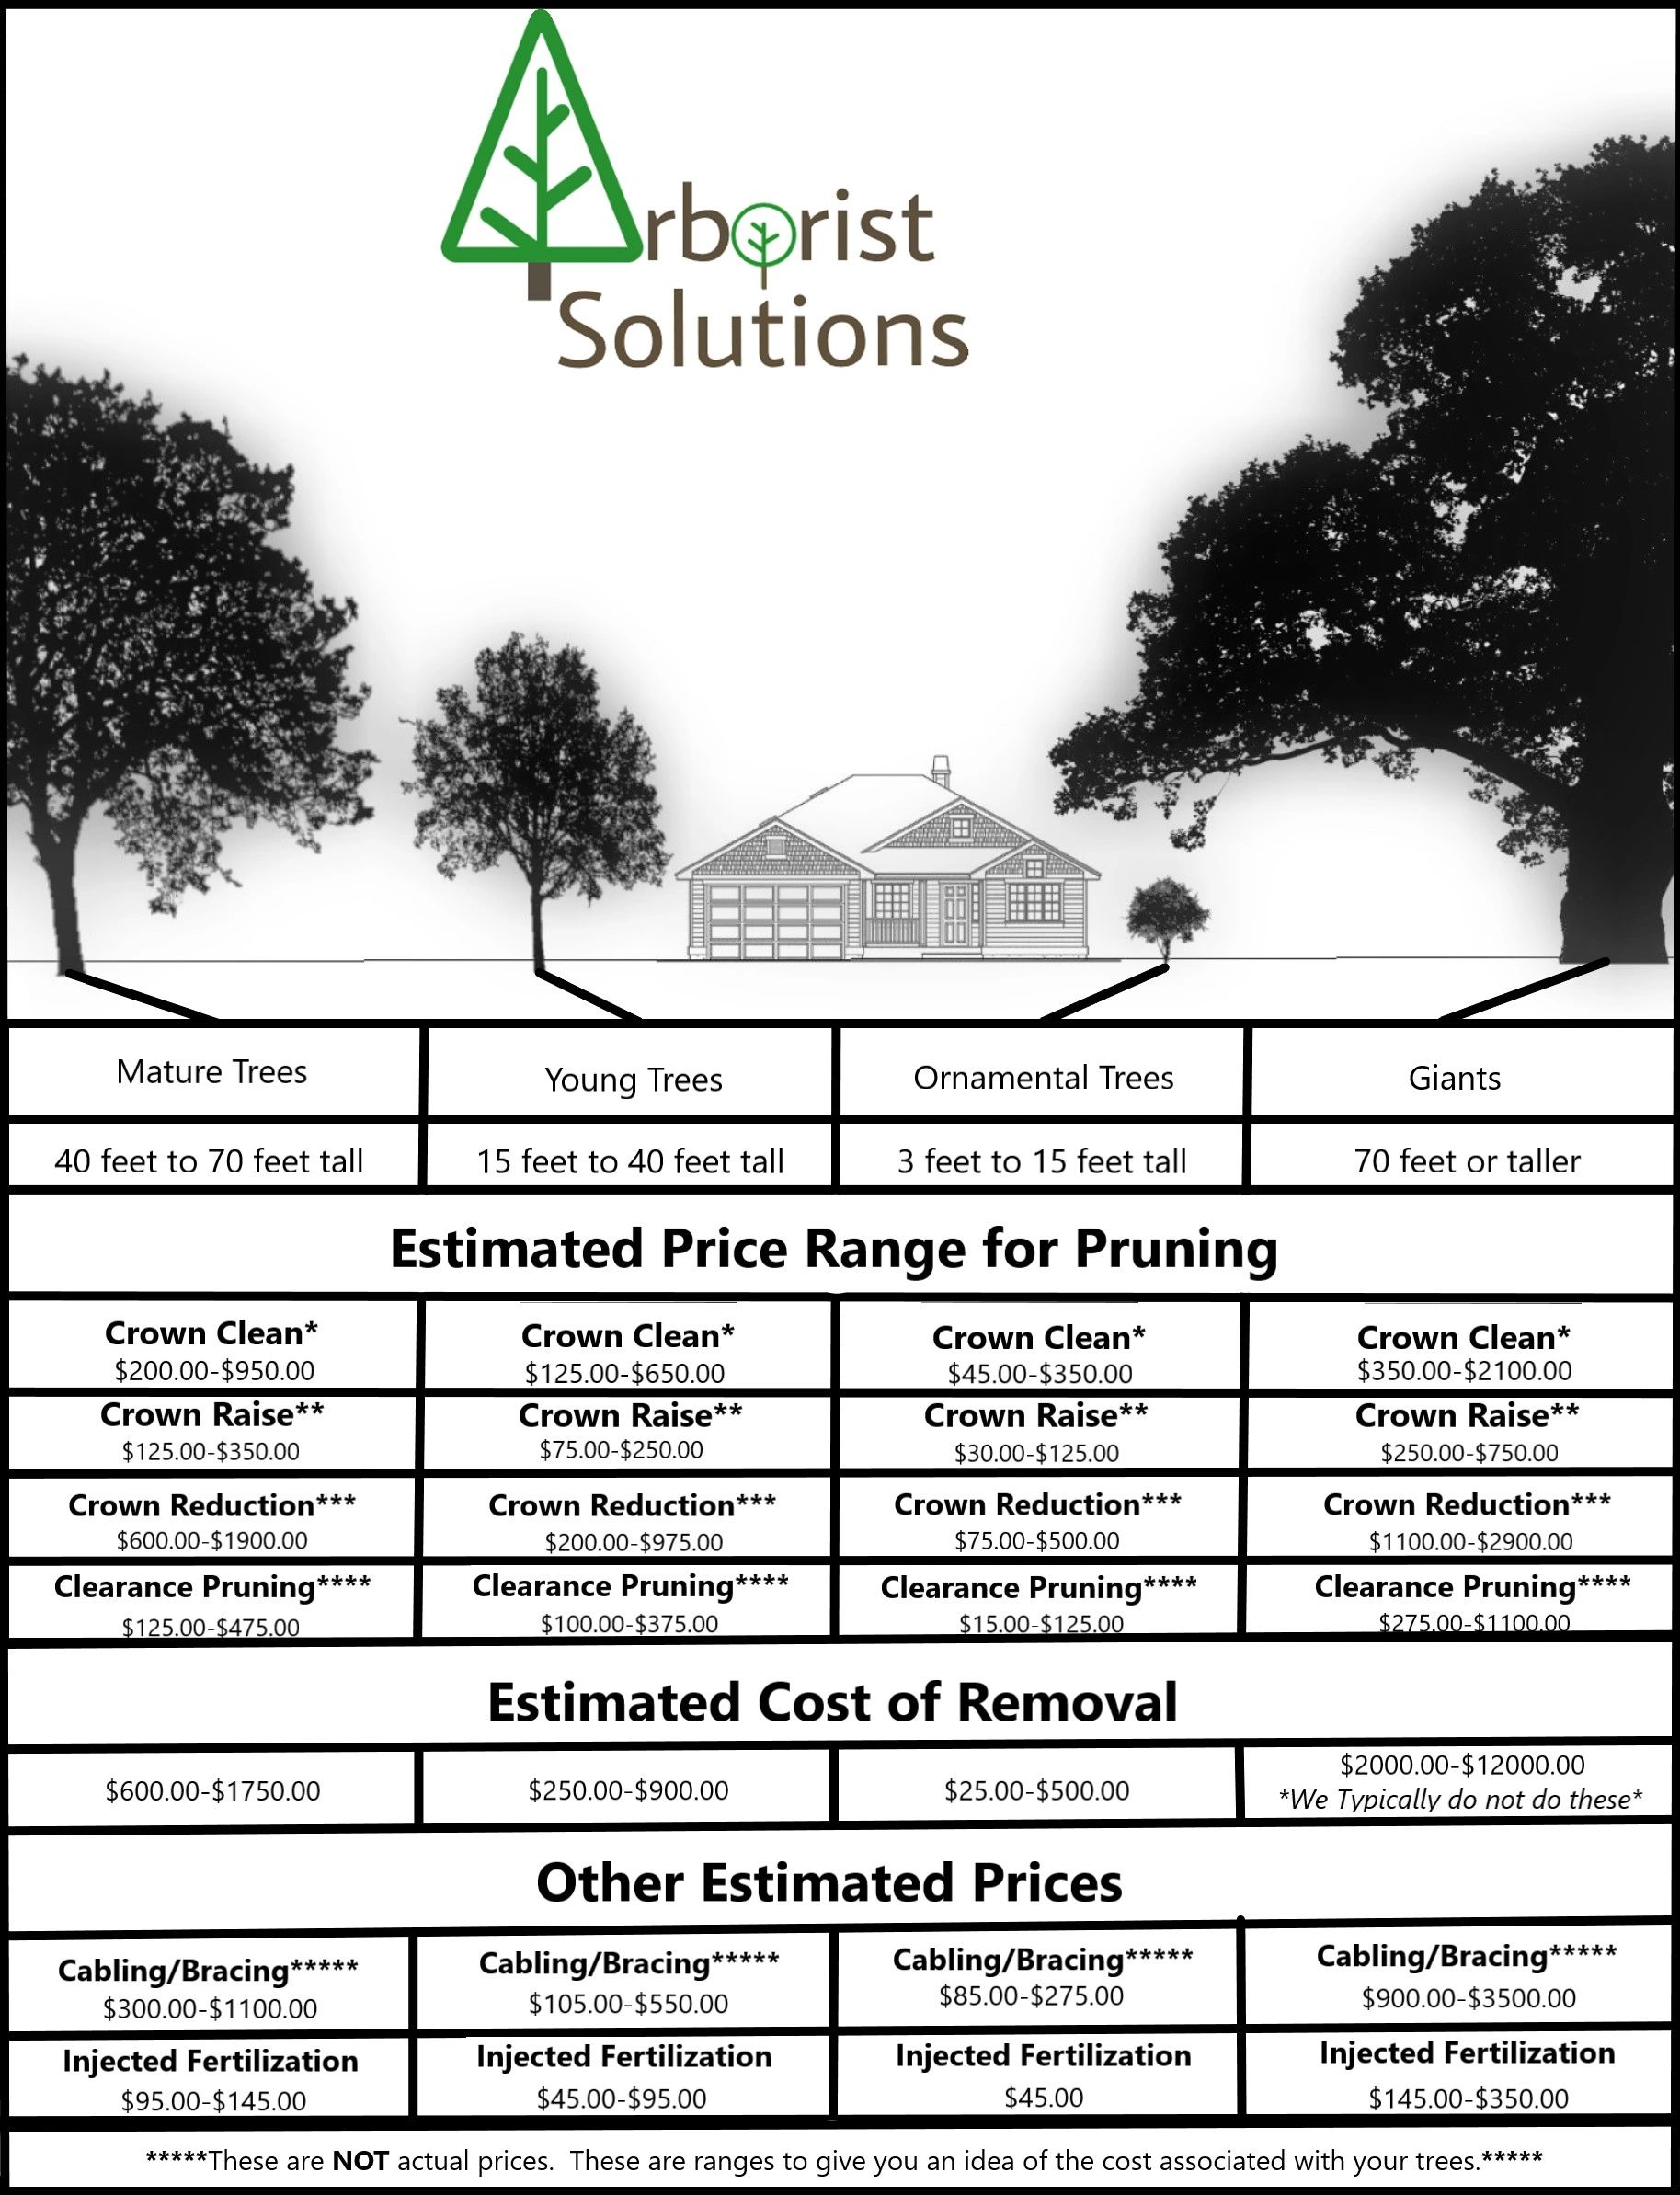 A Price list of our Arborist Services, including tree pruning, tree removal, and tree cabling.